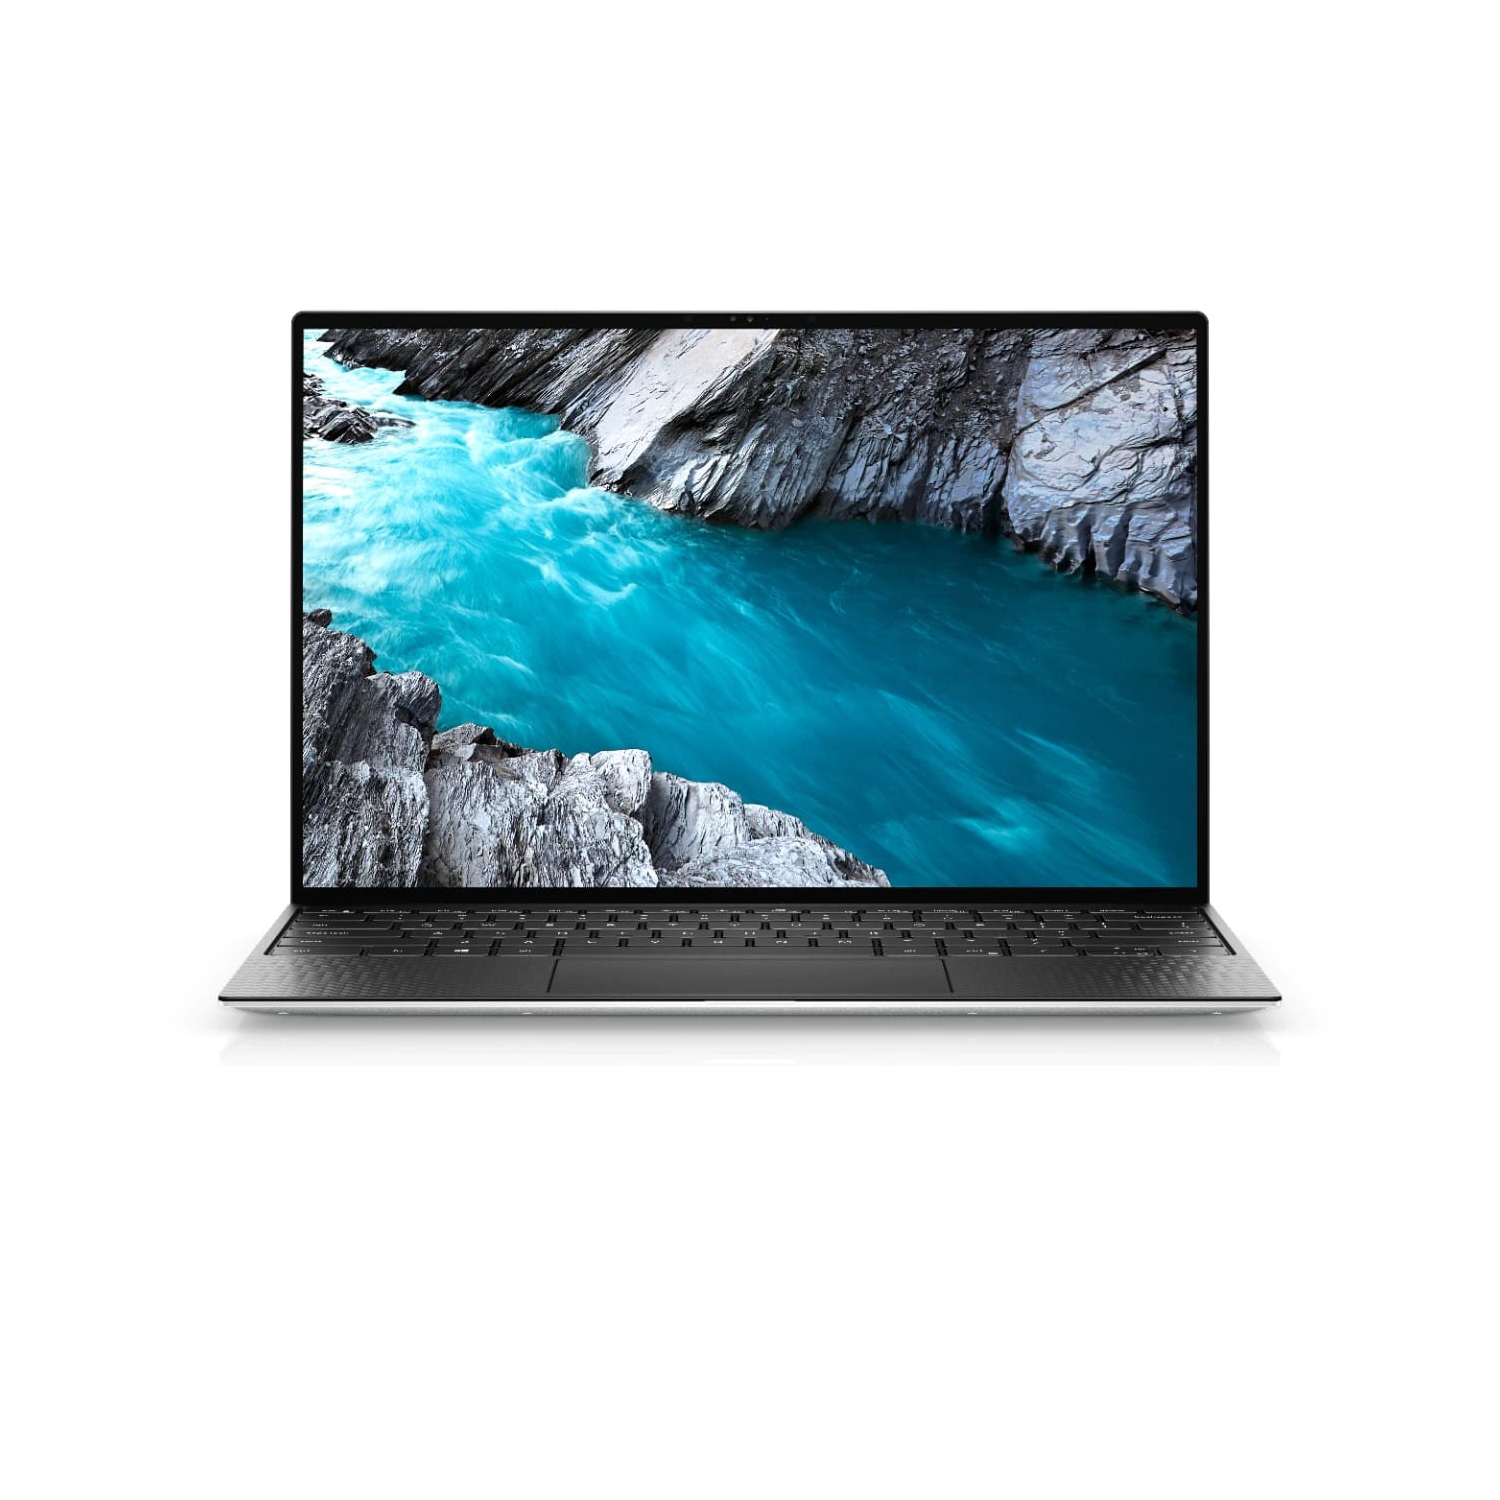 Refurbished (Excellent) - Dell XPS 13 9300 Laptop (2020) | 13.3" FHD+ | Core i7 - 1TB SSD - 8GB RAM | 4 Cores @ 3.9 GHz - 10th Gen CPU Certified Refurbished